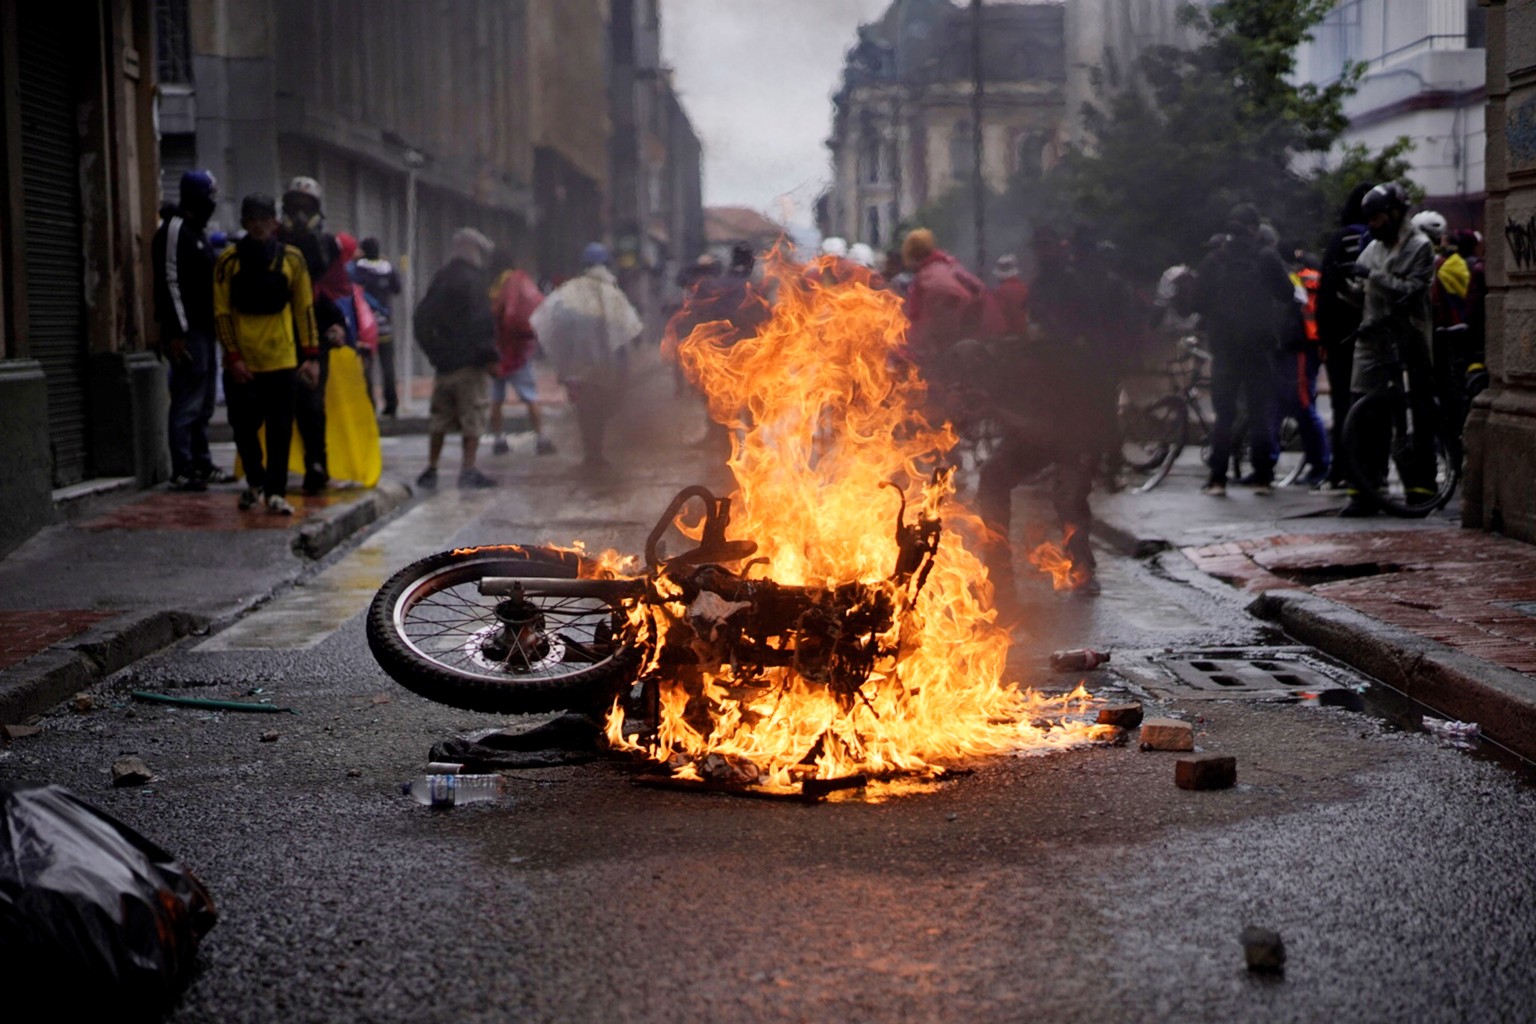 epa09180015 A motorcycle is set on fire during a new day of protests in Bogota, Colombia, 05 May 2021. A week into the protests, thousands continued to take to the streets against the government of Iv ...